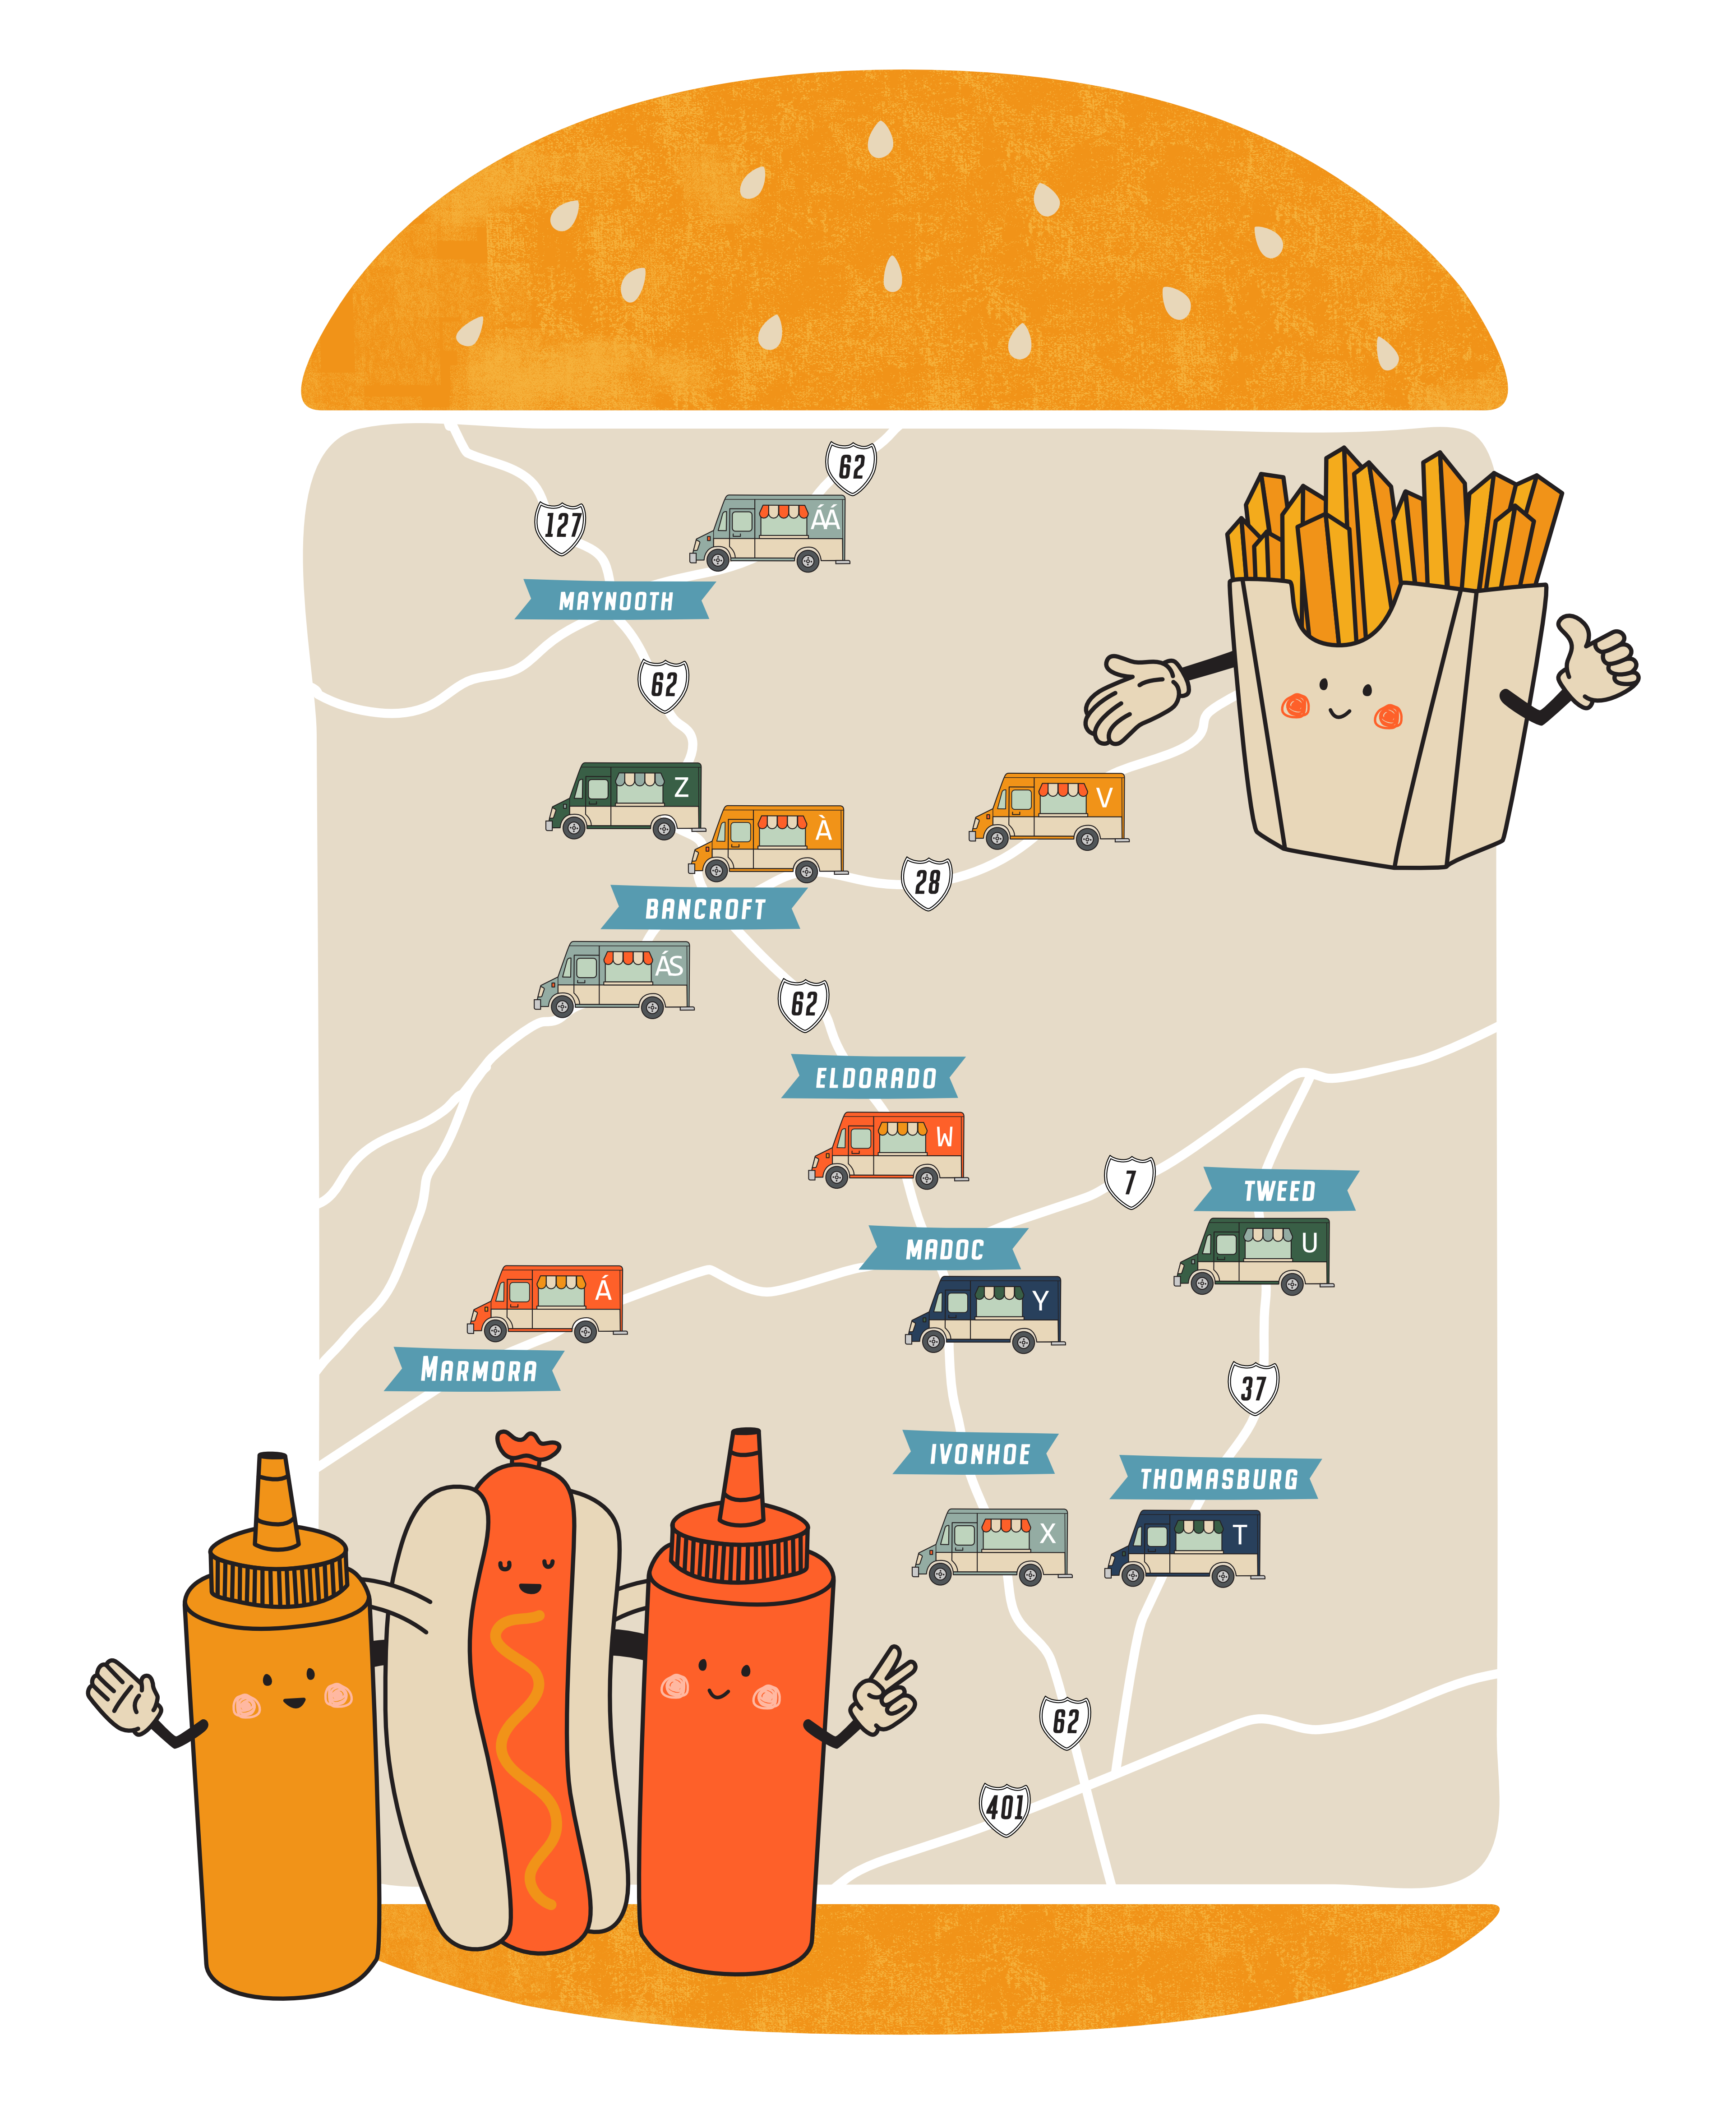 Fun design of a map in the shape of a hamburger identifying all the food trucks in Hastings County for visitors